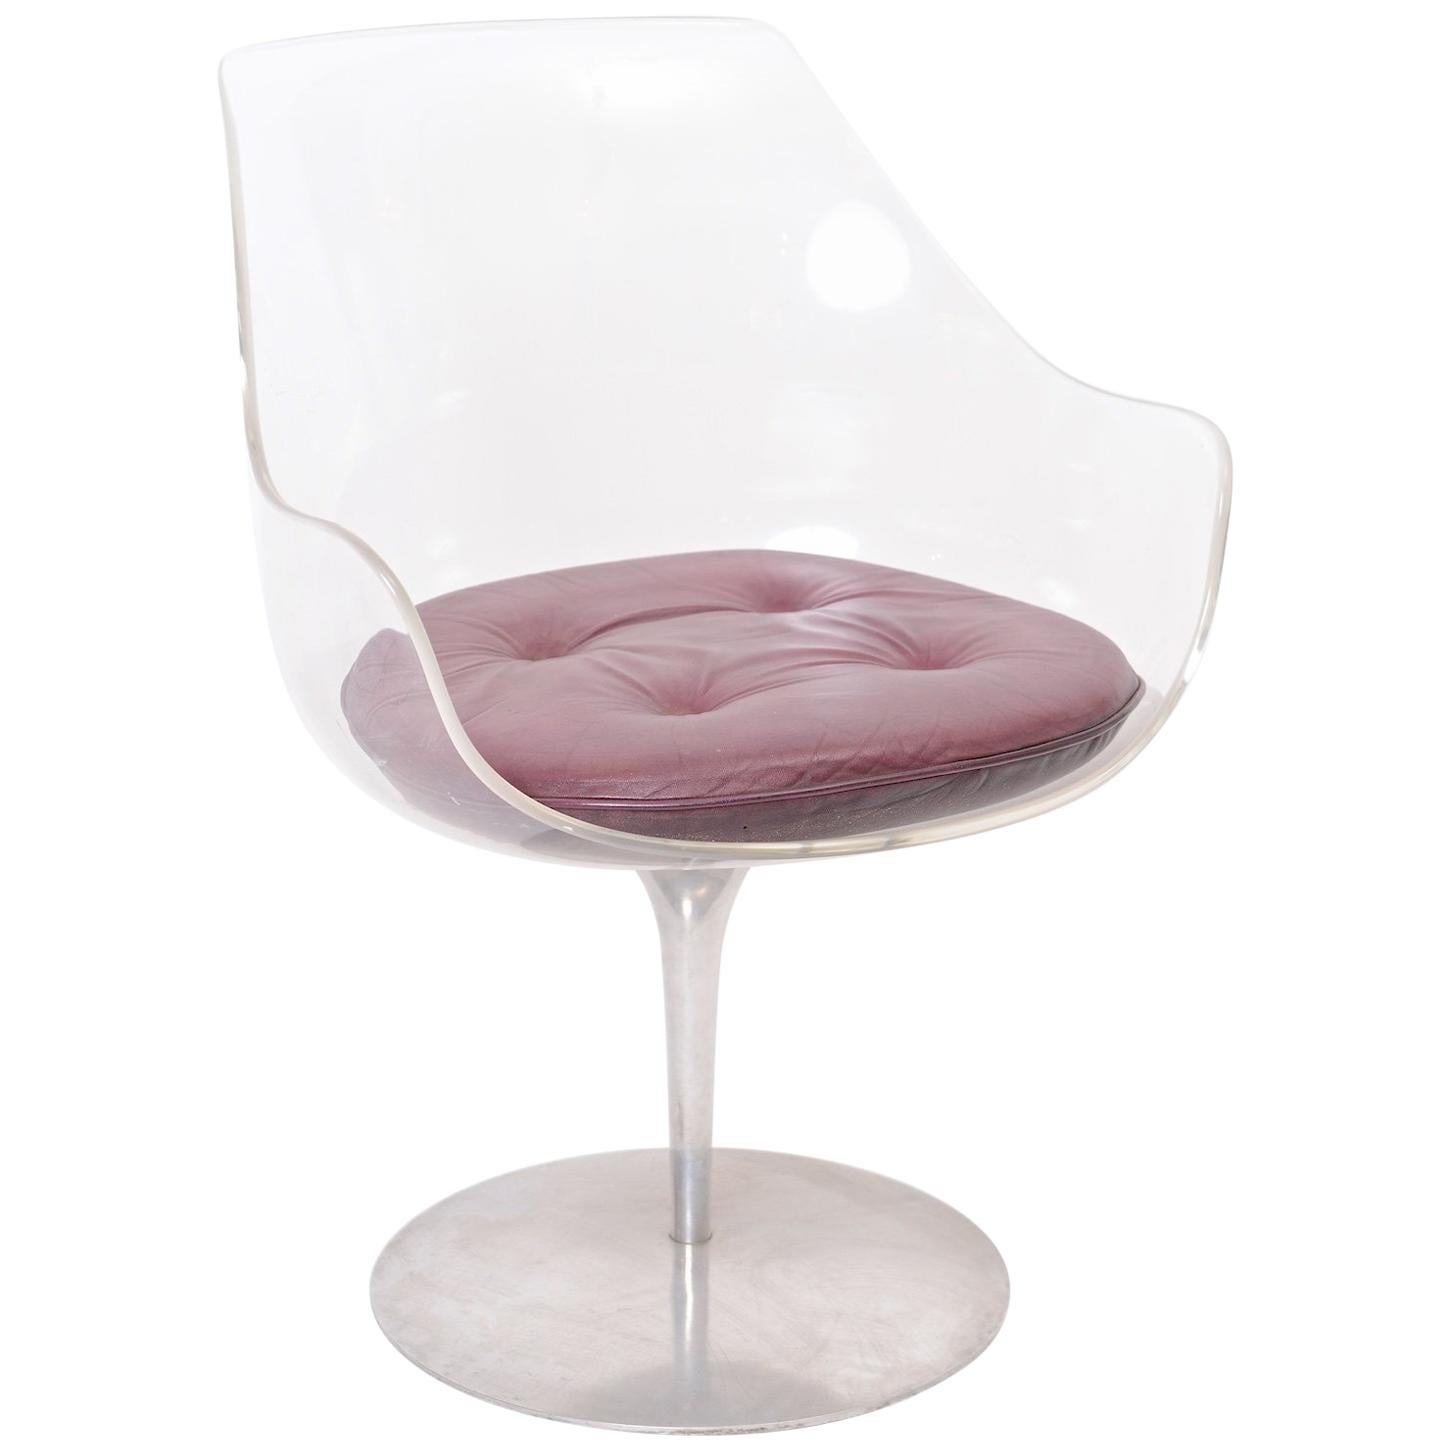 Champagne chair by Erwine and Estelle Laverne for Formes Nouvelles, circa 1962